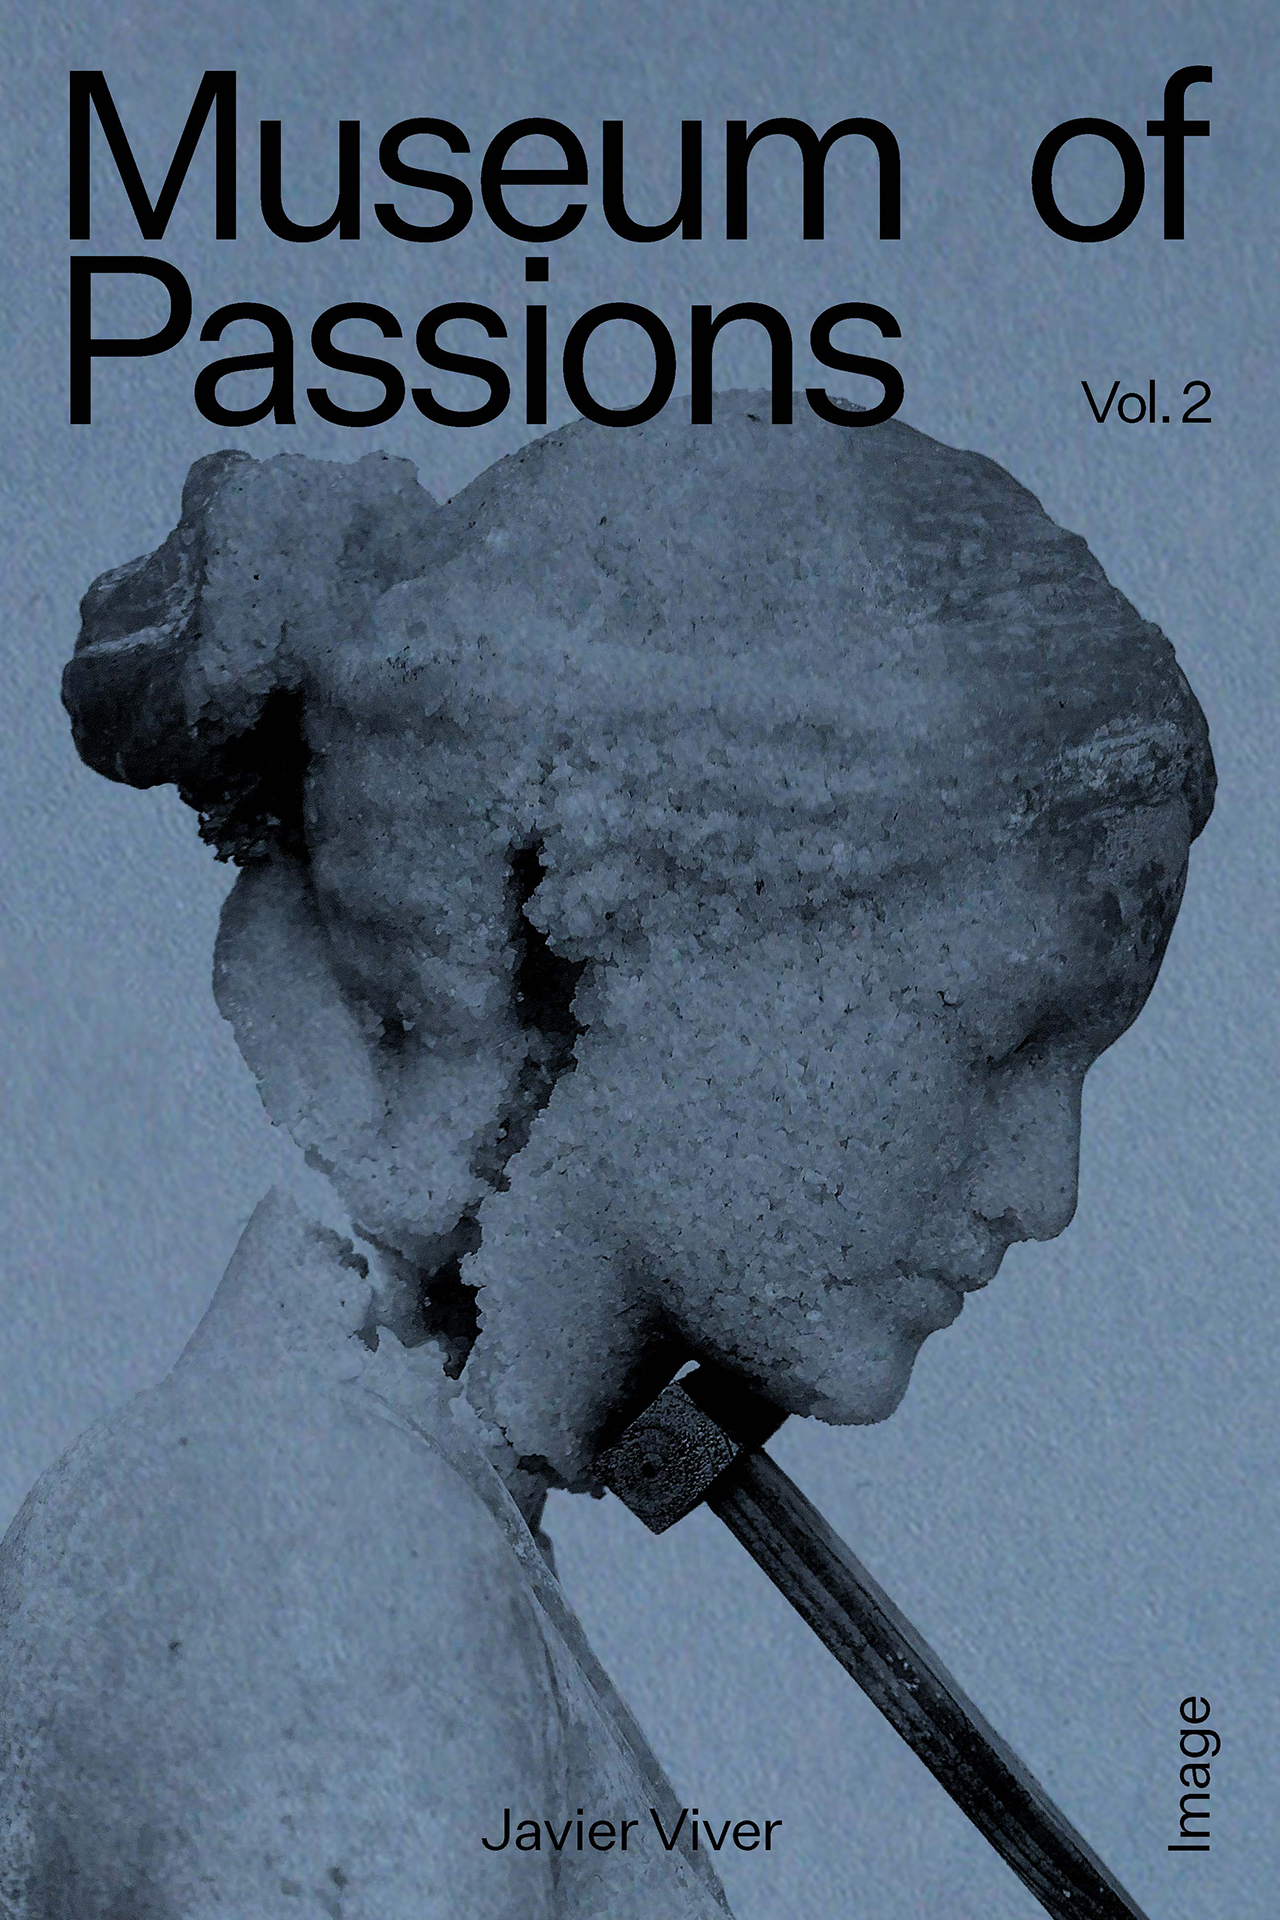 Museum of Passions Vol. 2 Image, 2020 (ENG)